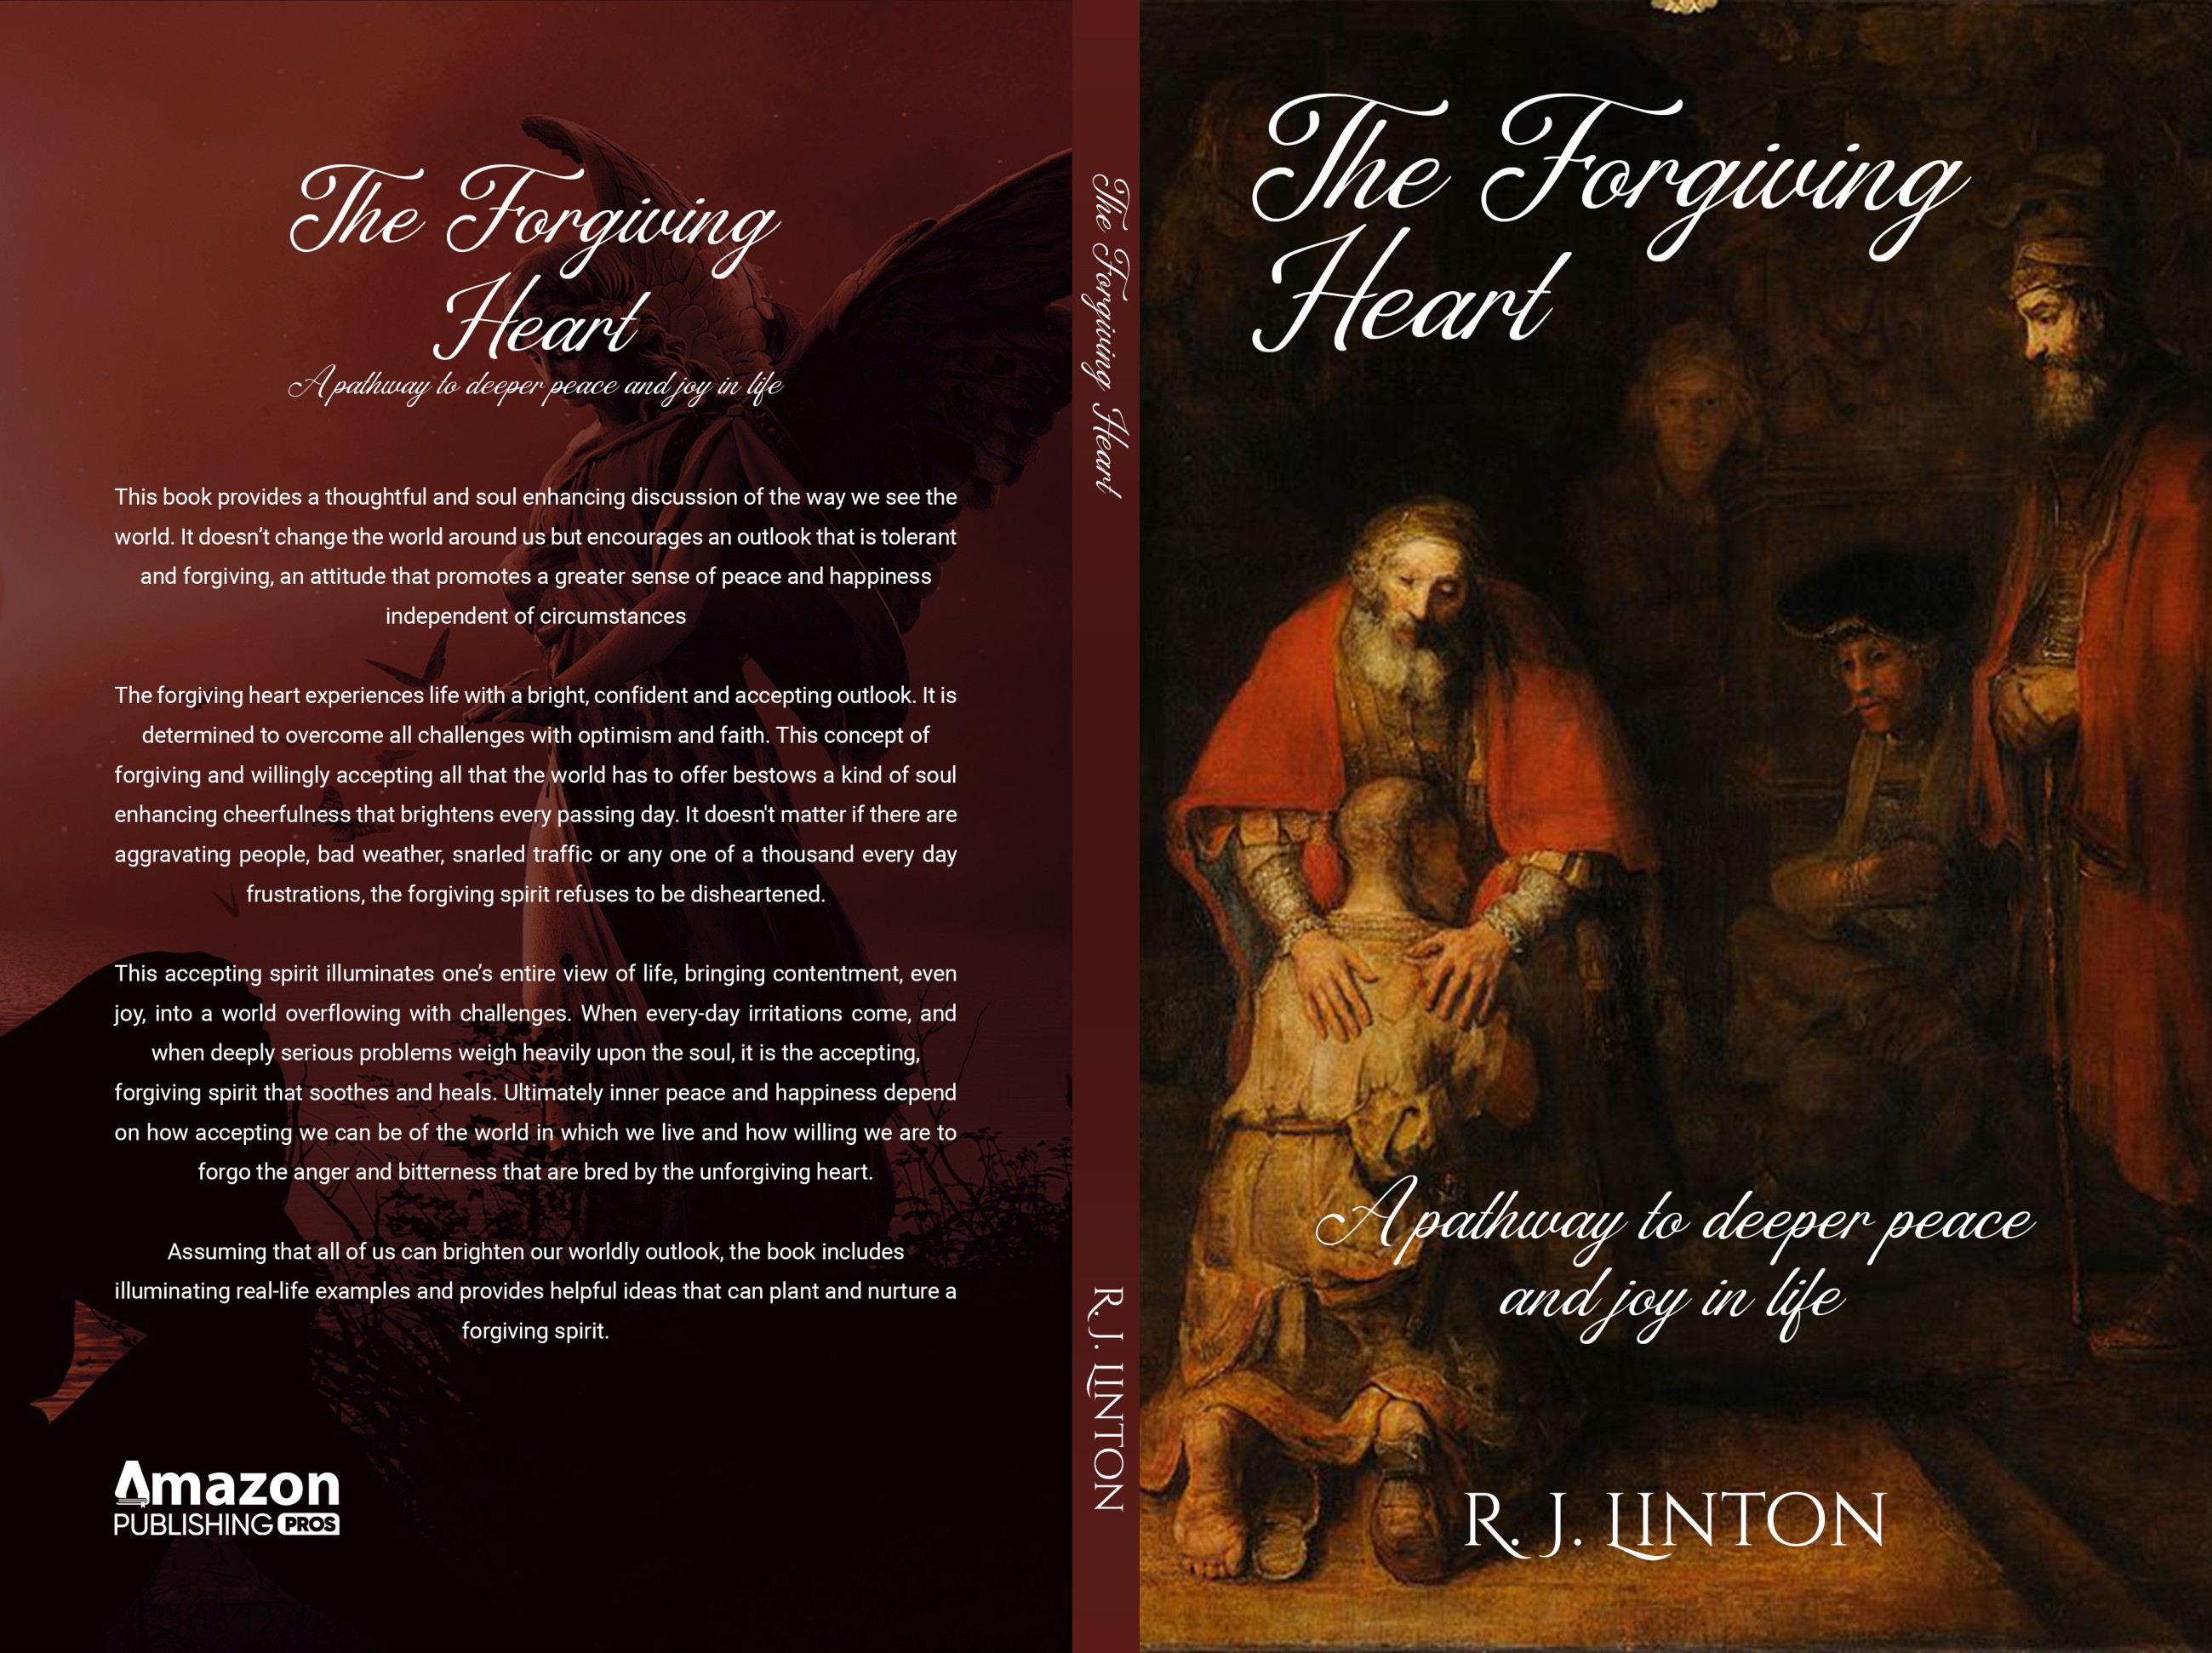 Author Roderick J. Linton's New Book "The Forgiving Heart" Discusses the Importance of Strengthening One's Faith